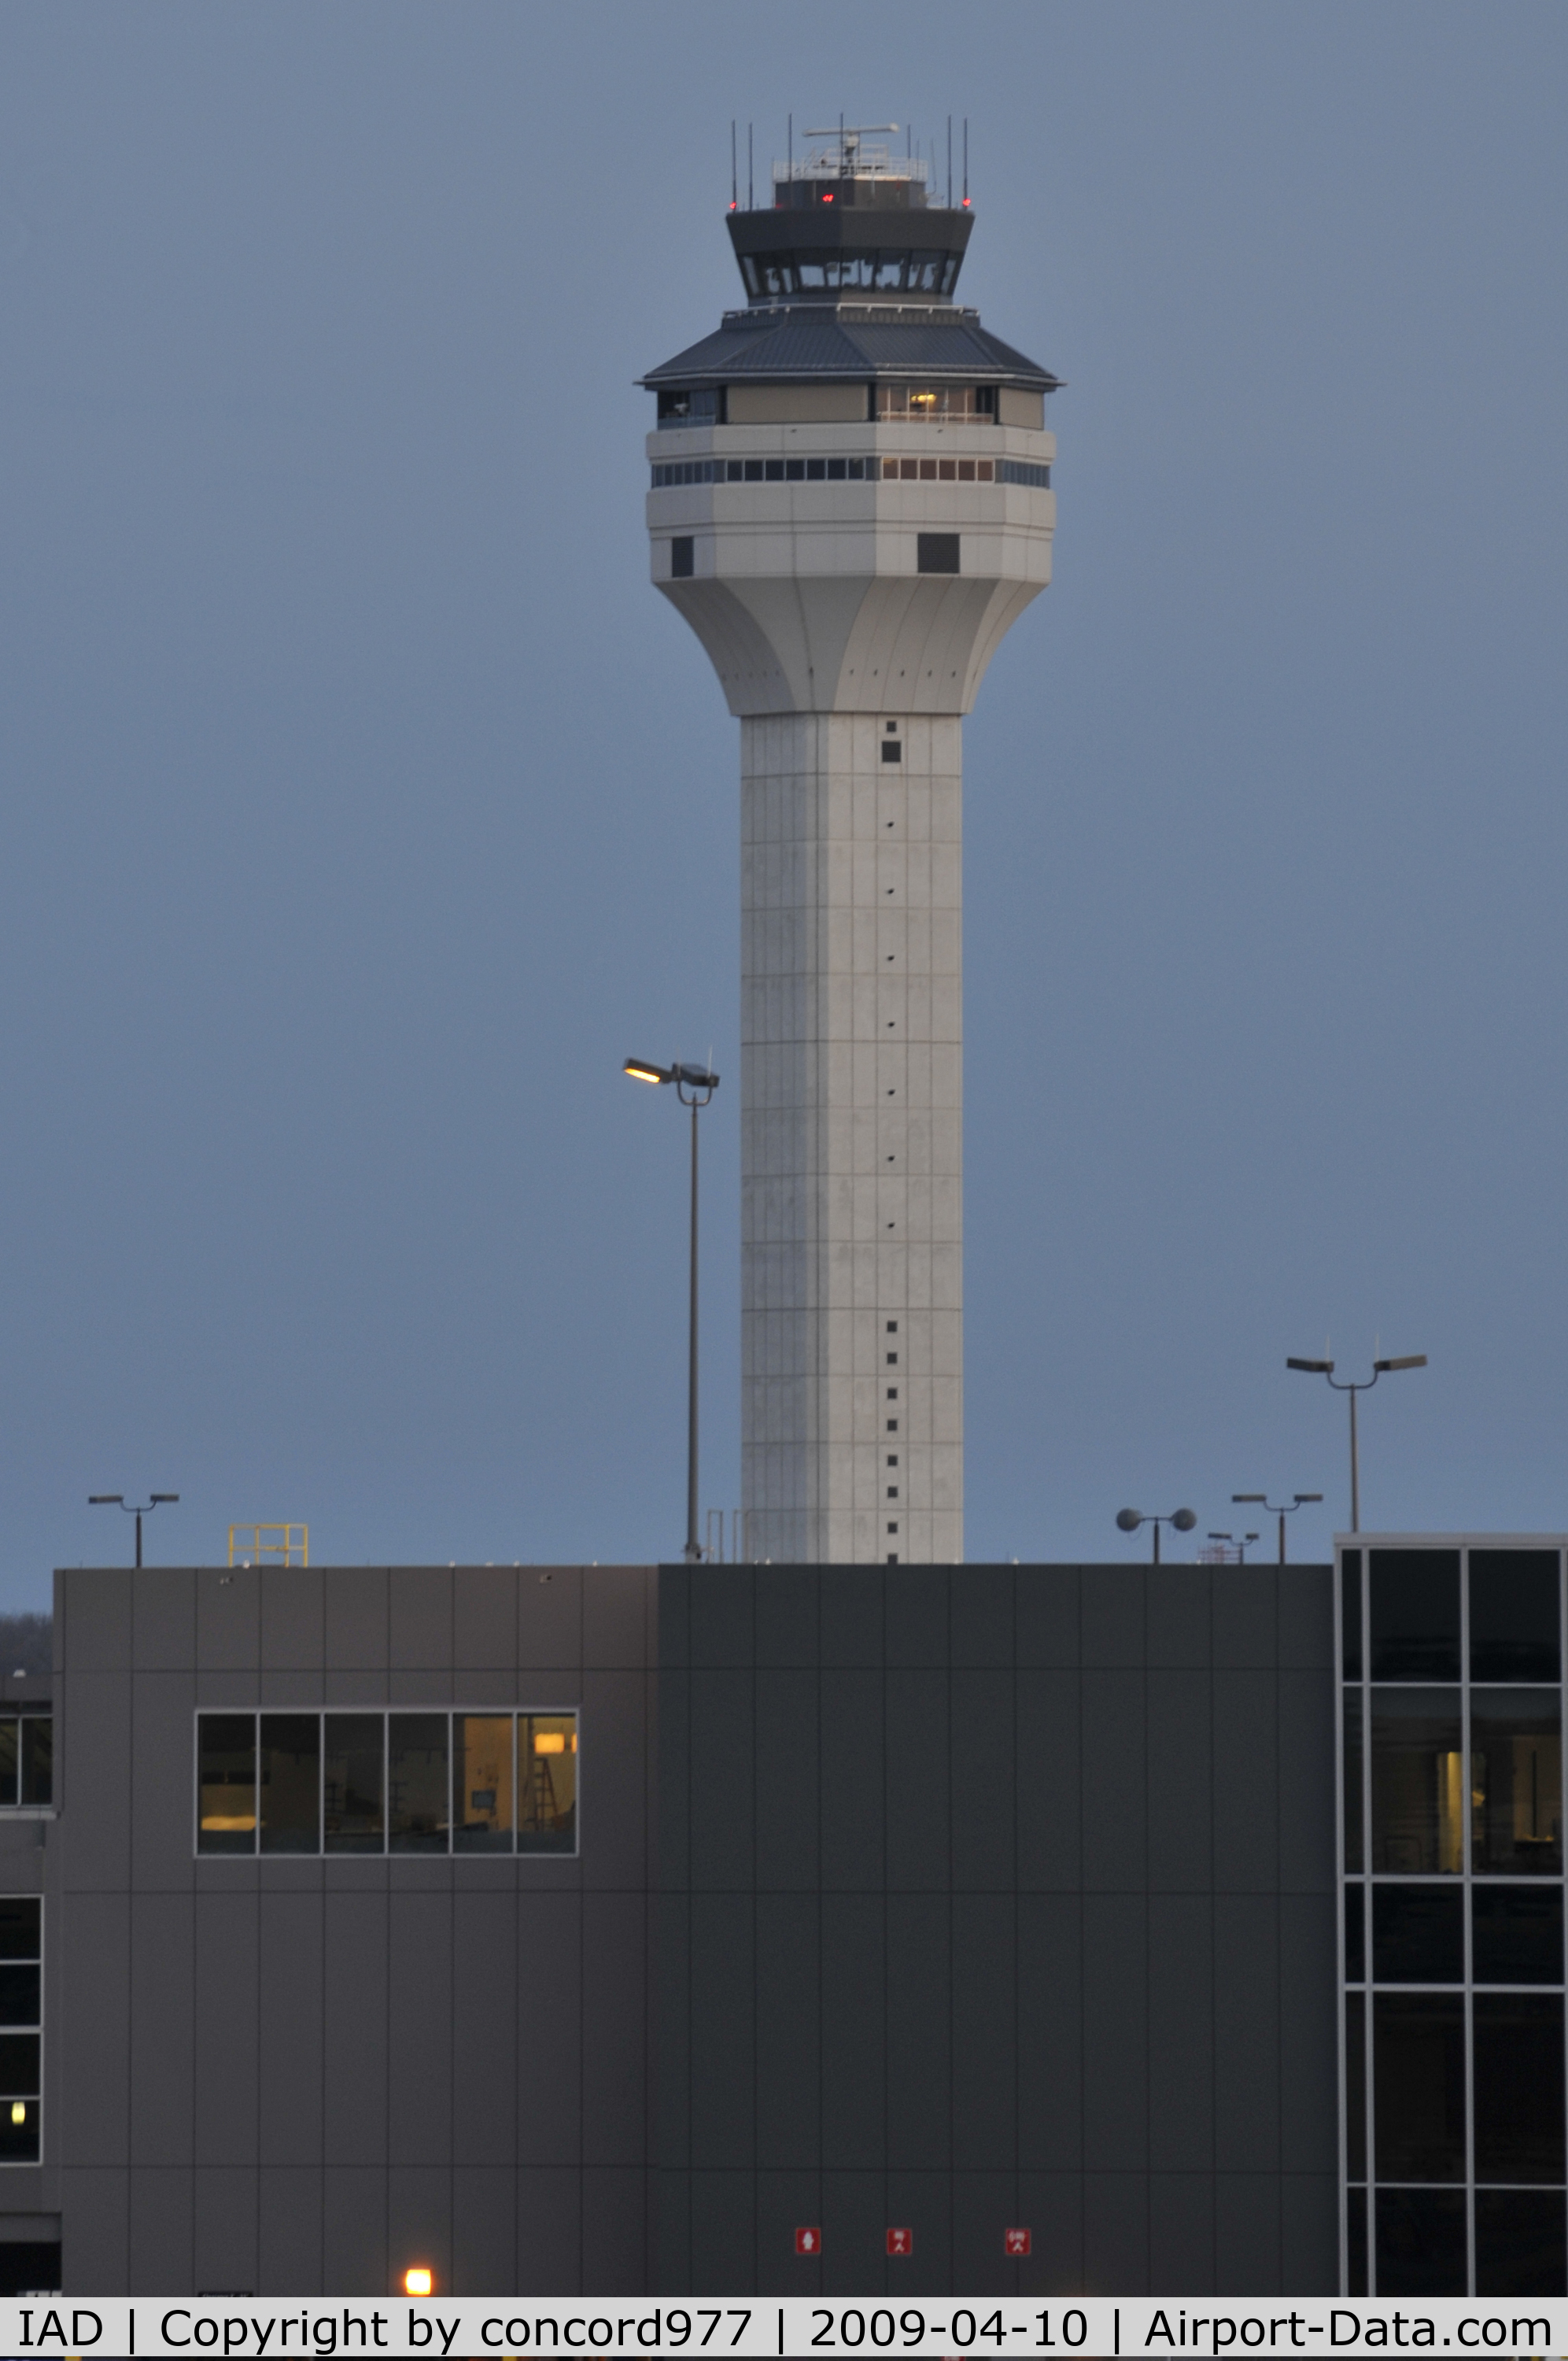 Washington Dulles International Airport (IAD) - The new tower lacks the elegance of the original terminal building and old tower.